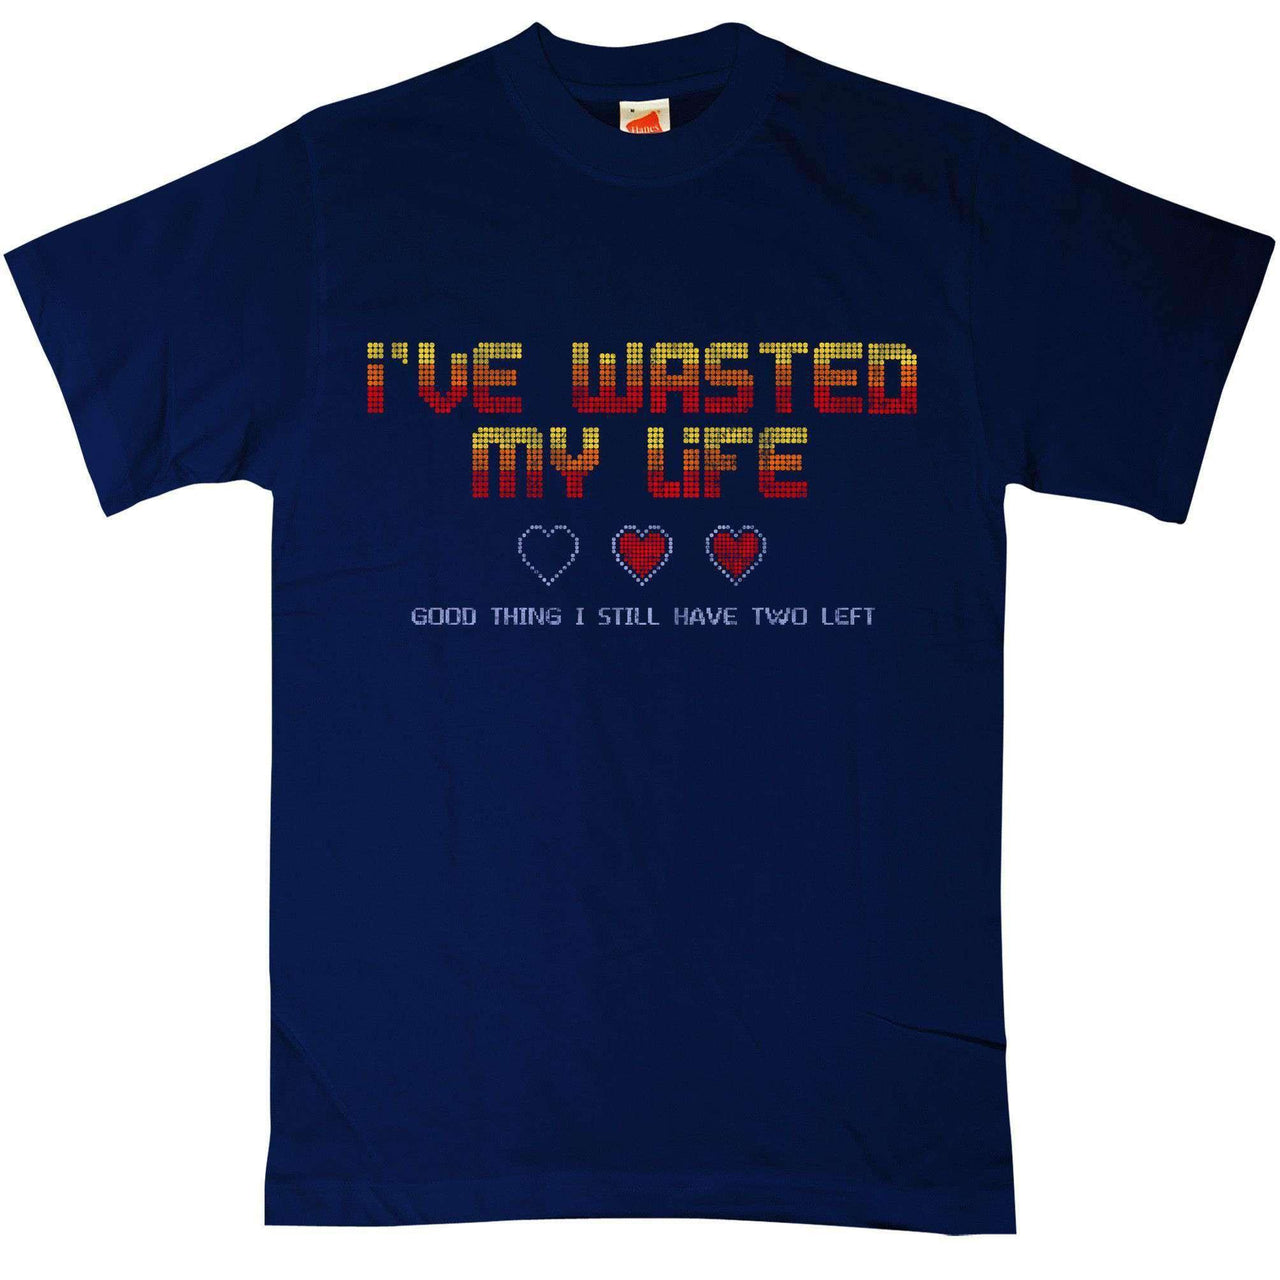 Ive Wasted My Life Unisex T-Shirt For Men And Women 8Ball